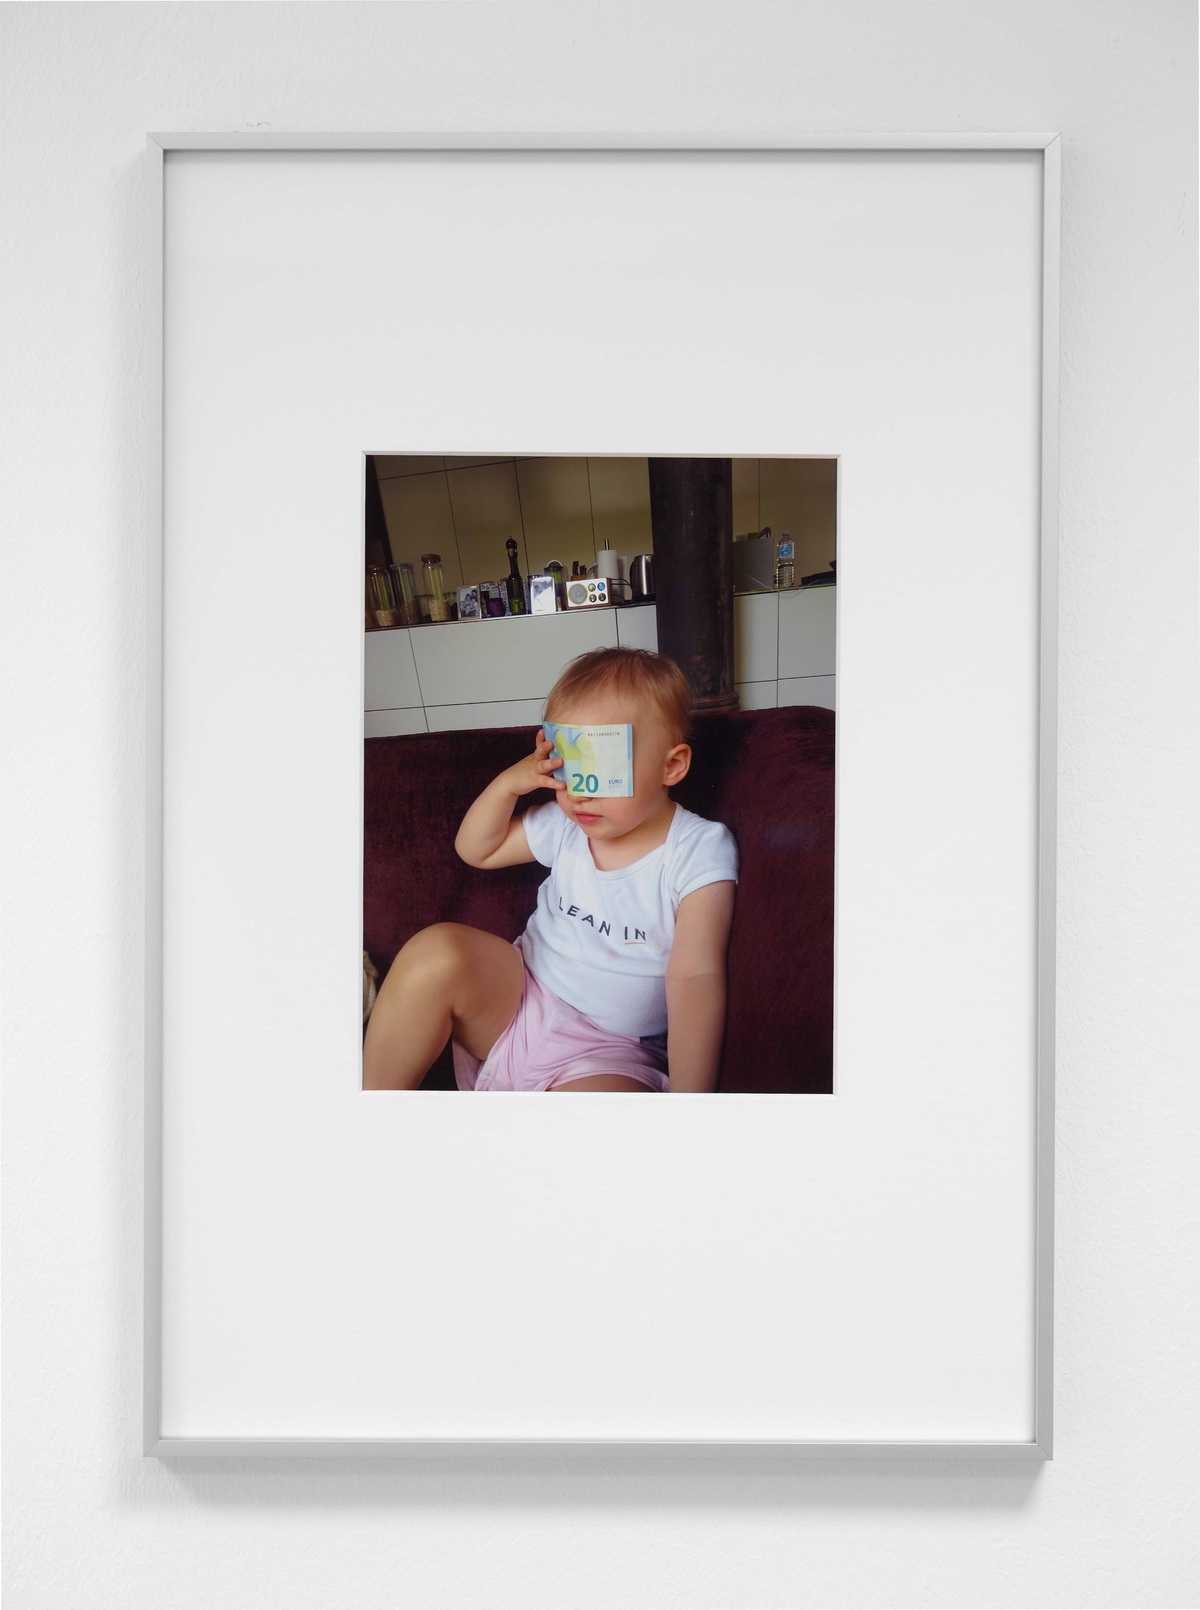 Angharad Williams, Surplus and Care (Playing with money I), 2021C-type print61 x 42 x 2,5 cm (framed)